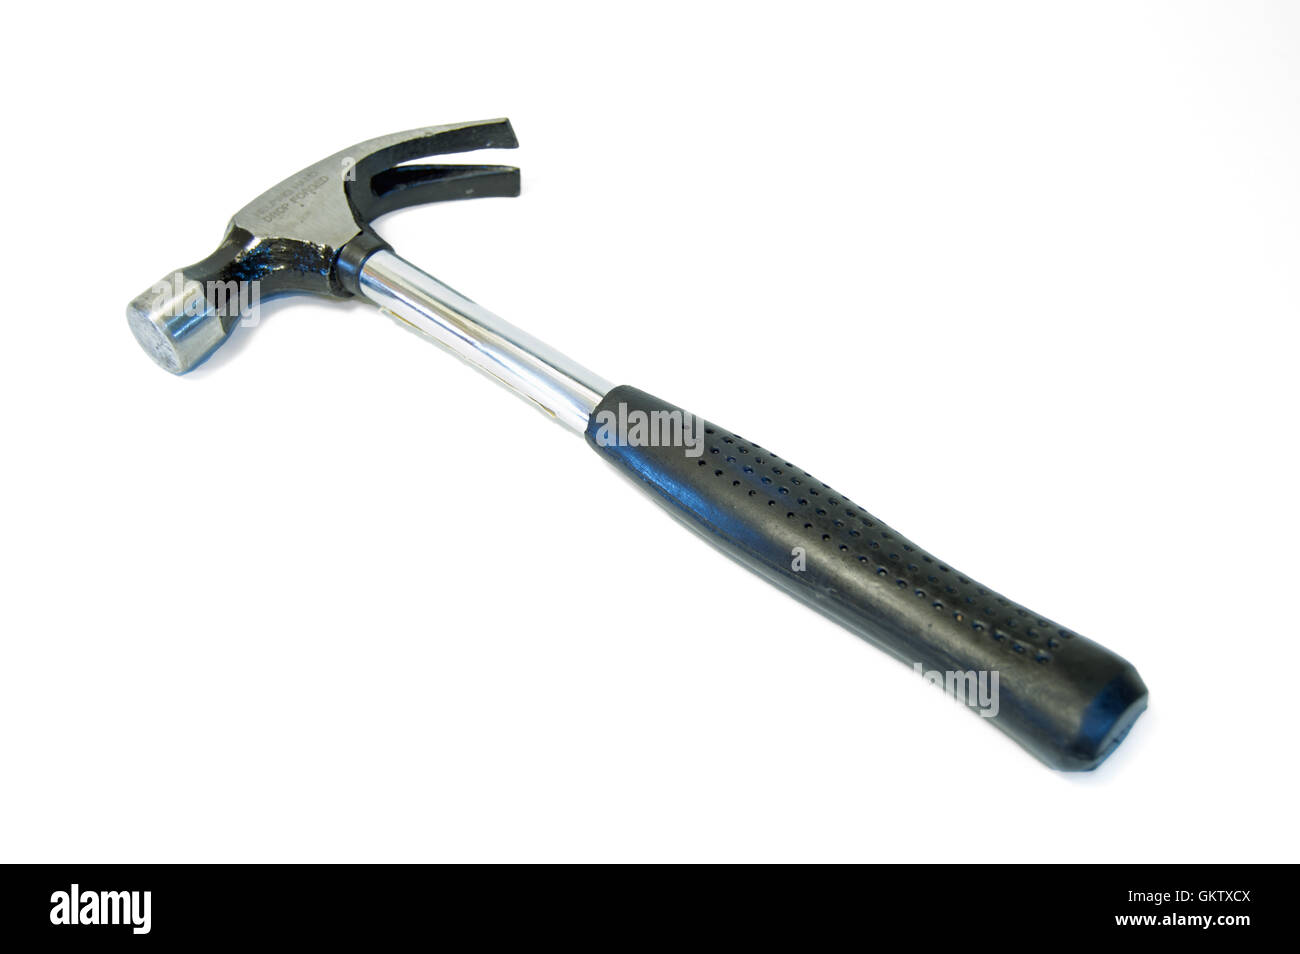 Rubber Hammer High Resolution Stock Photography and Images - Alamy